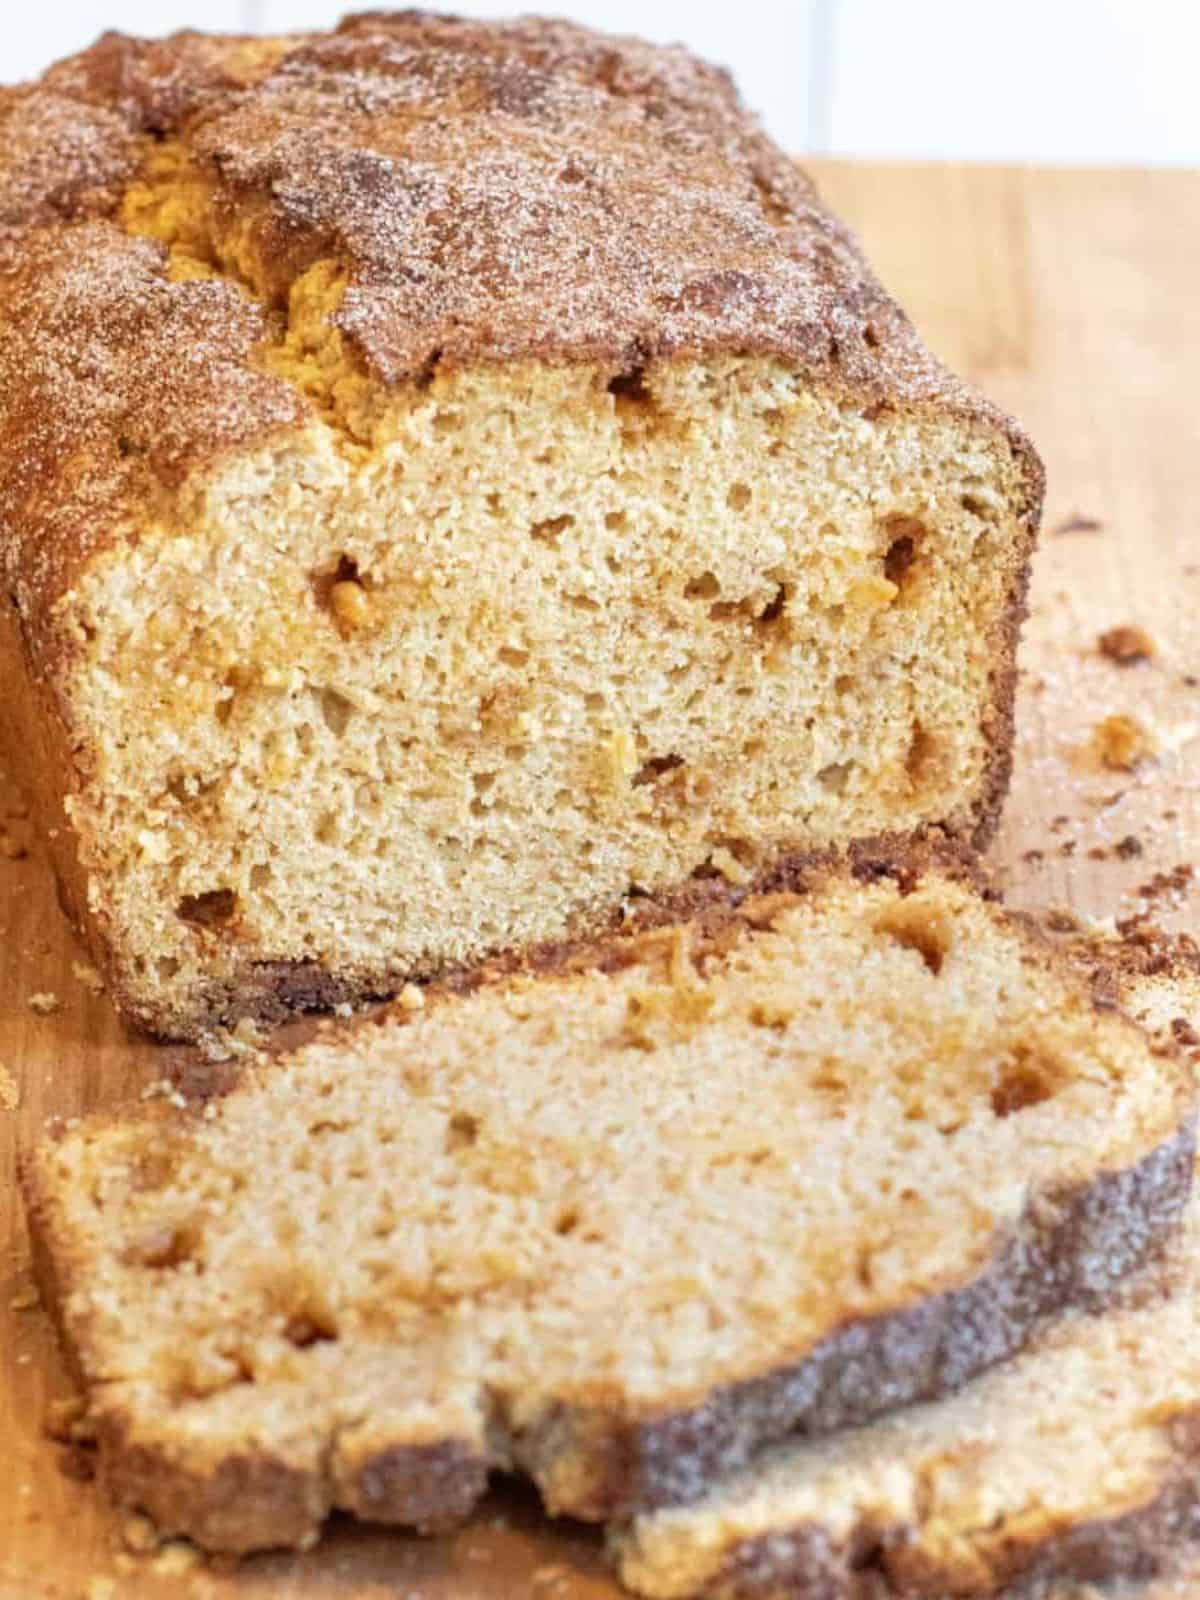 delicious butterscotch snickerdoodle bread, a sweet breakfast treat with a golden brown crust.